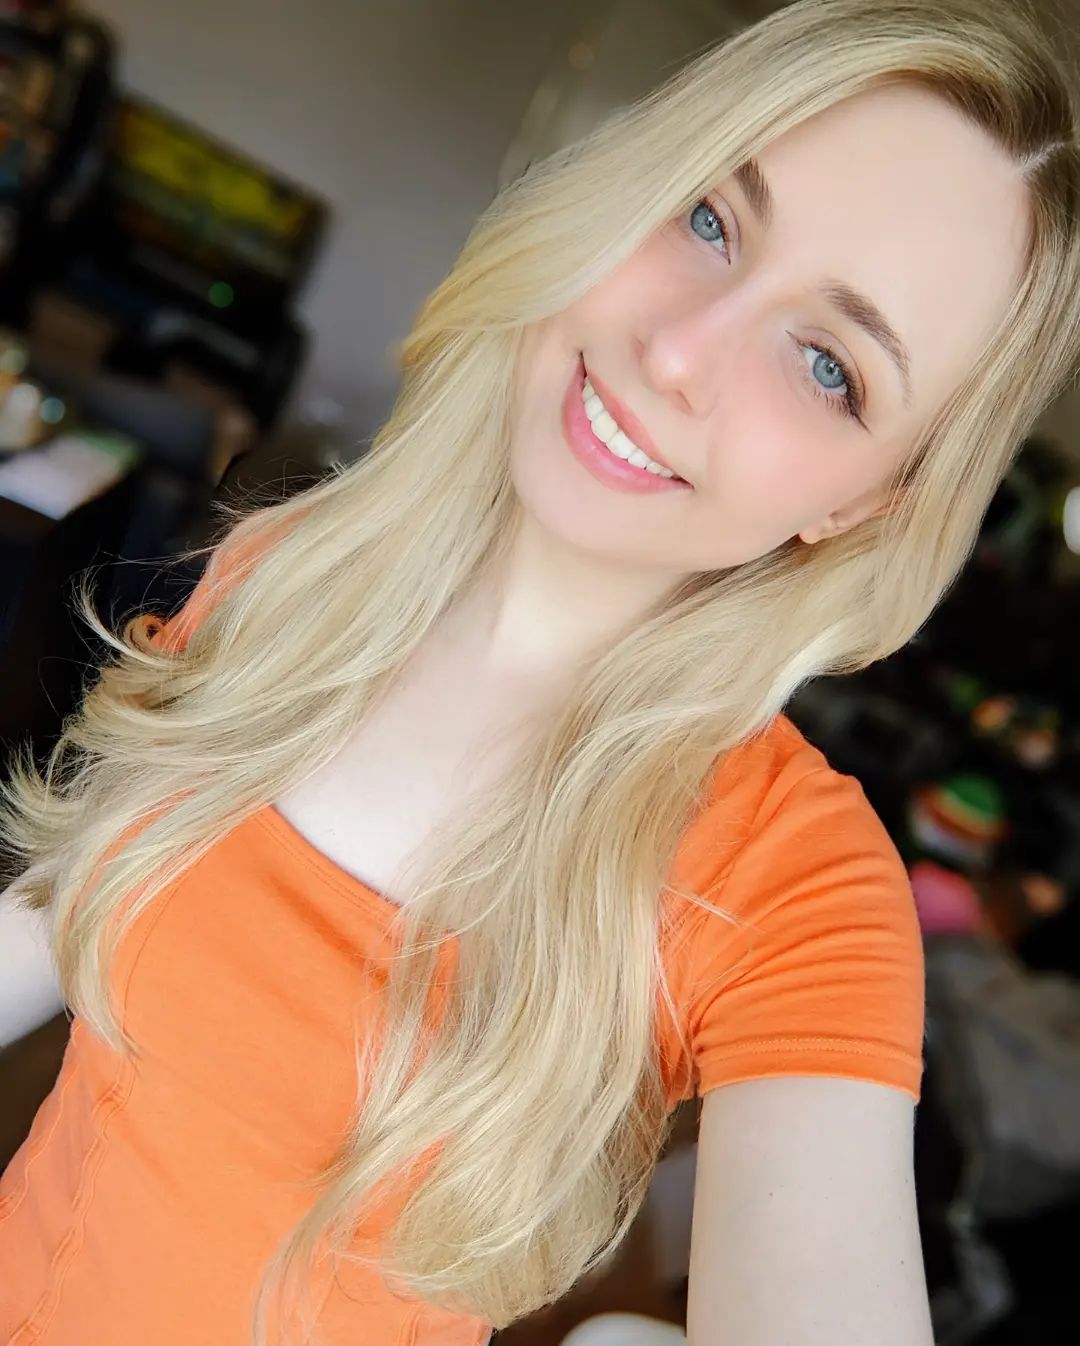 LIVE with the 10 HOURS FOR 10K!!
Twitch.tv/LittleLemonbun
.
.
.
.
.
.
.
.
.
Tags 1